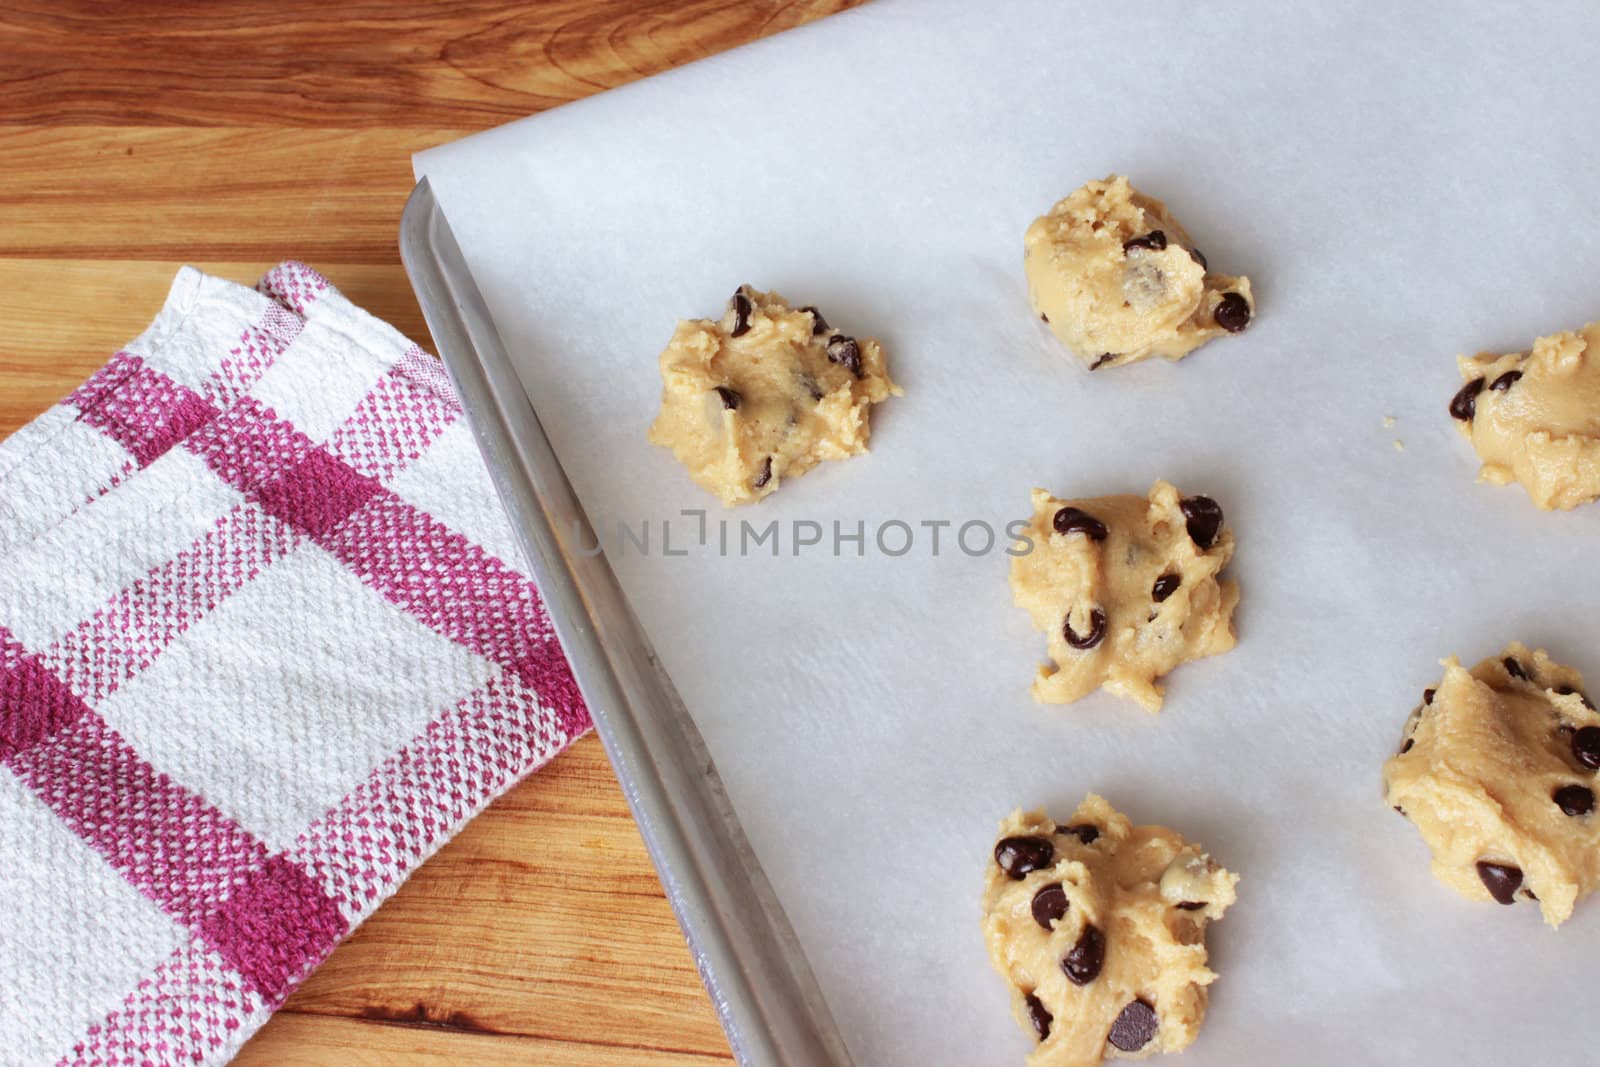 A close-up image of a cookie sheet lined with parchment paper, with chocolate chip cookie dough shaped into cookies, on a wooden counter with a red and white dish towel.